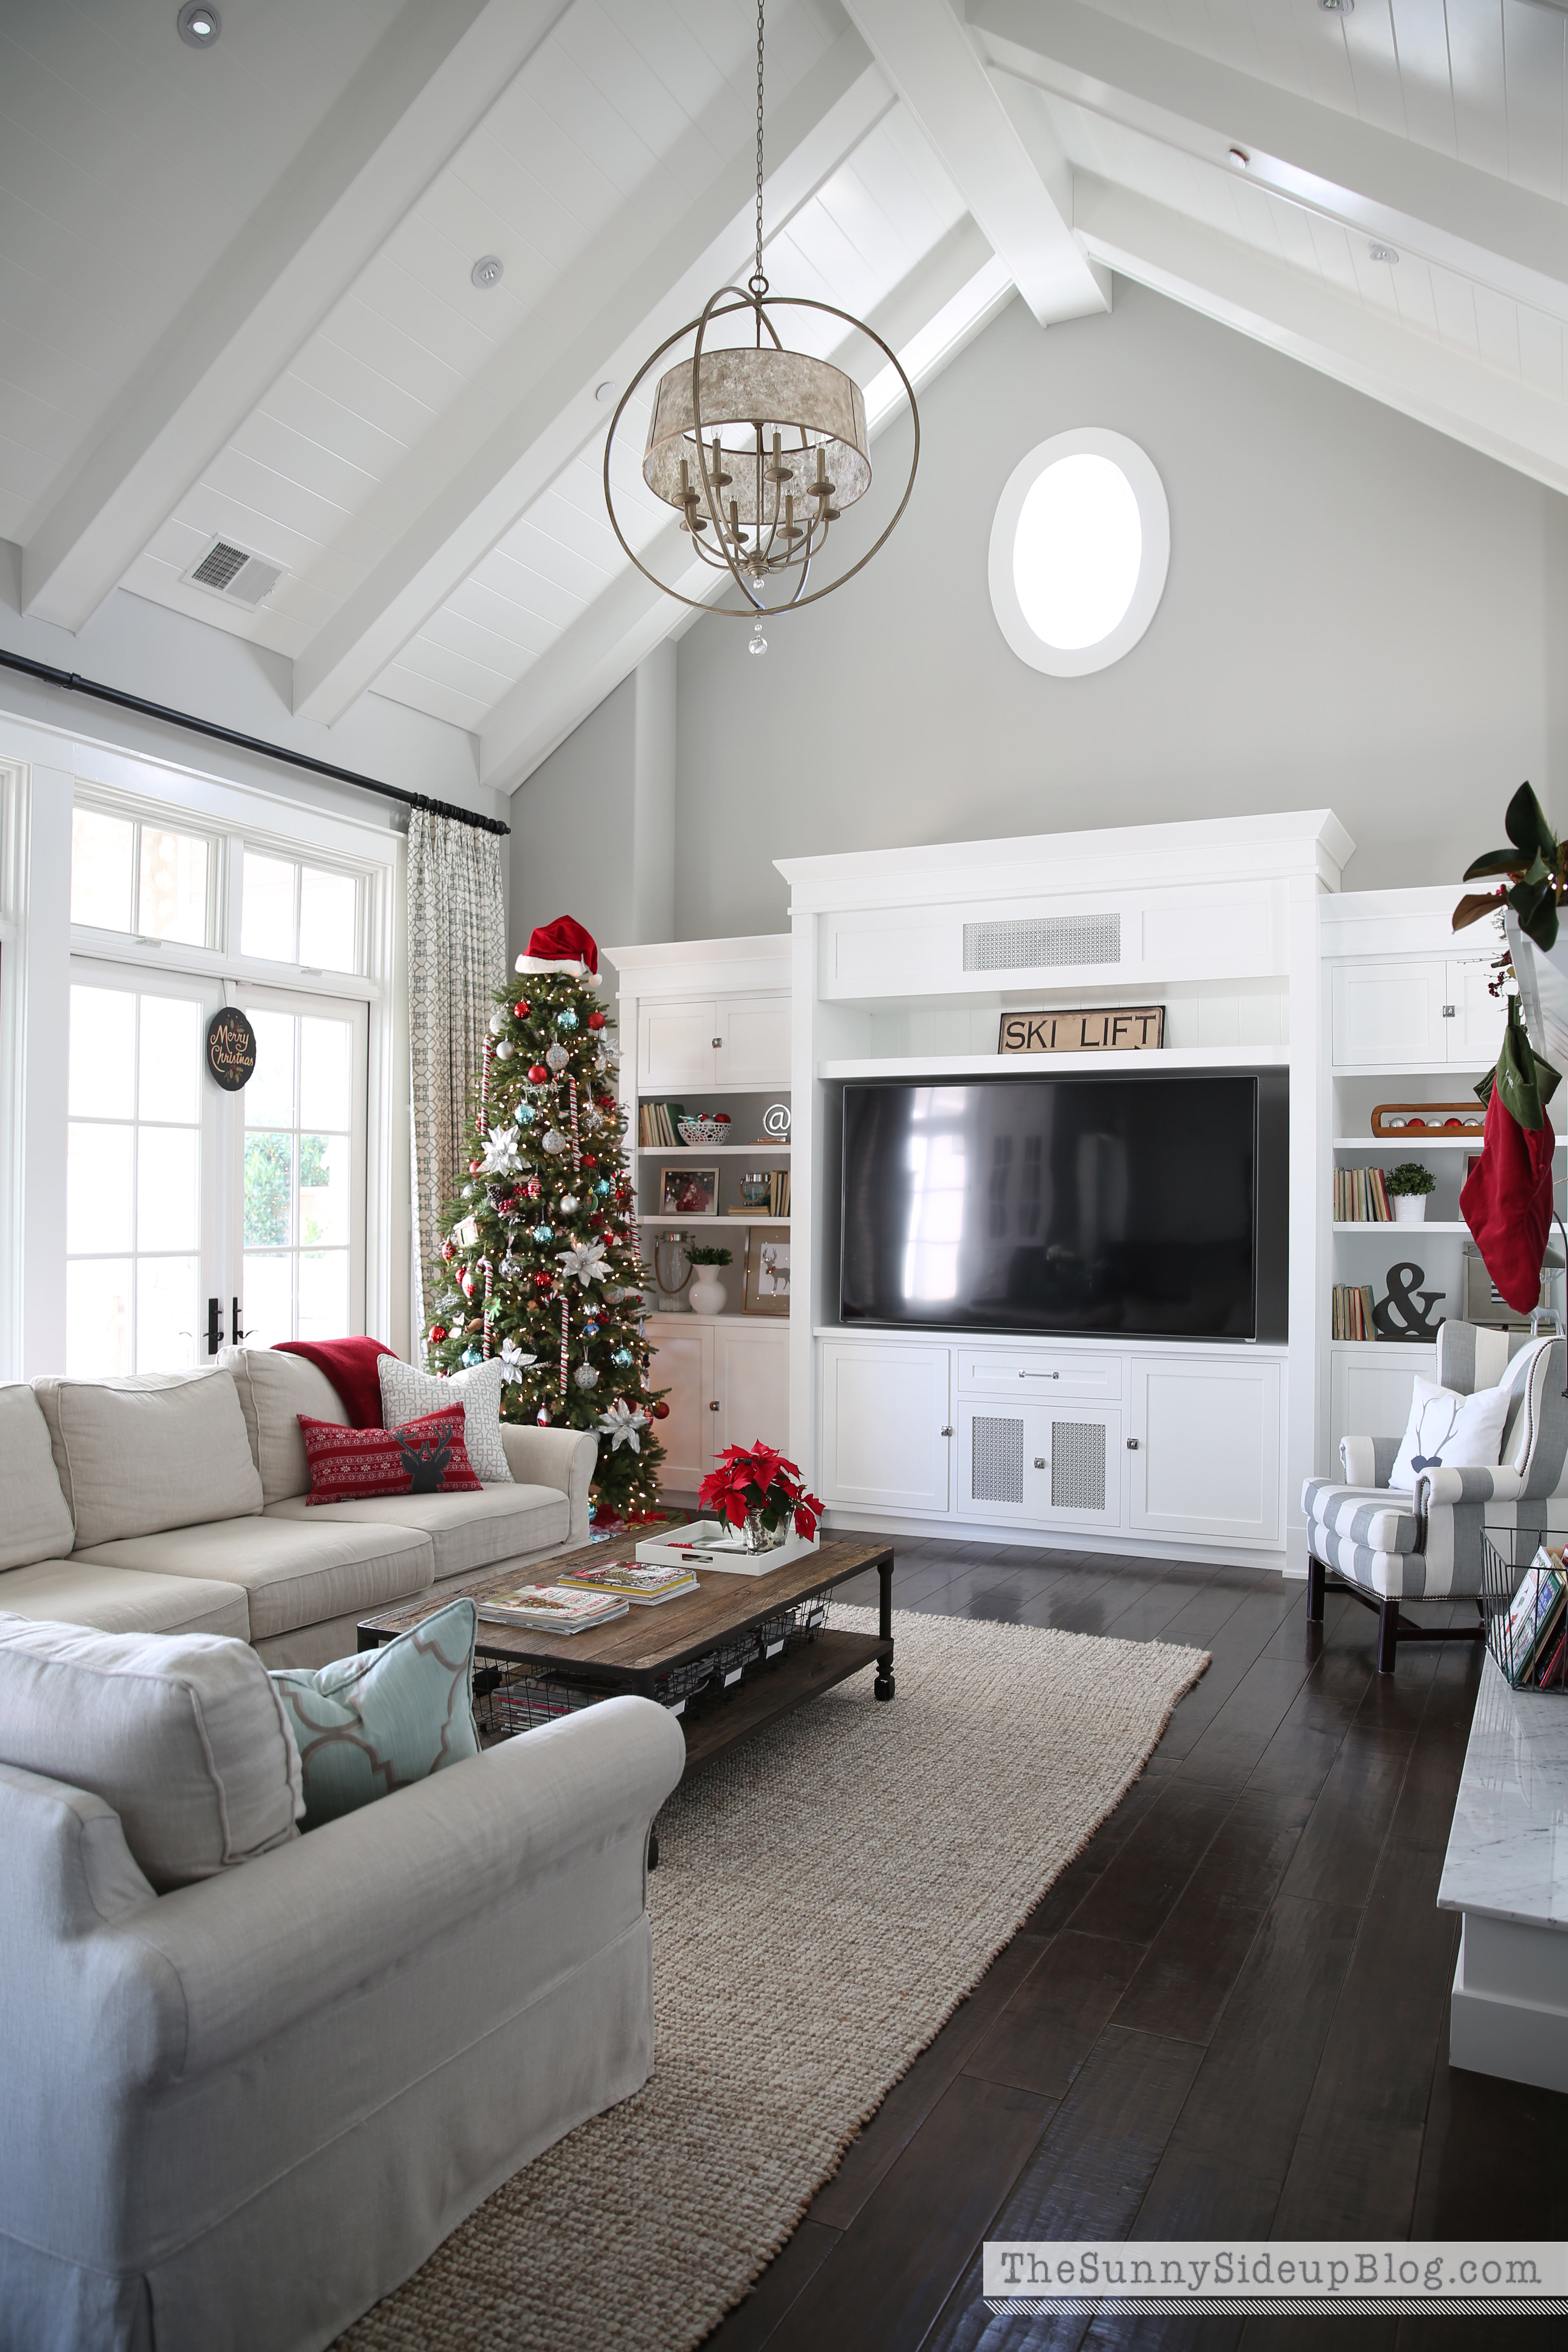 Christmas in the family room - The Sunny Side Up Blog